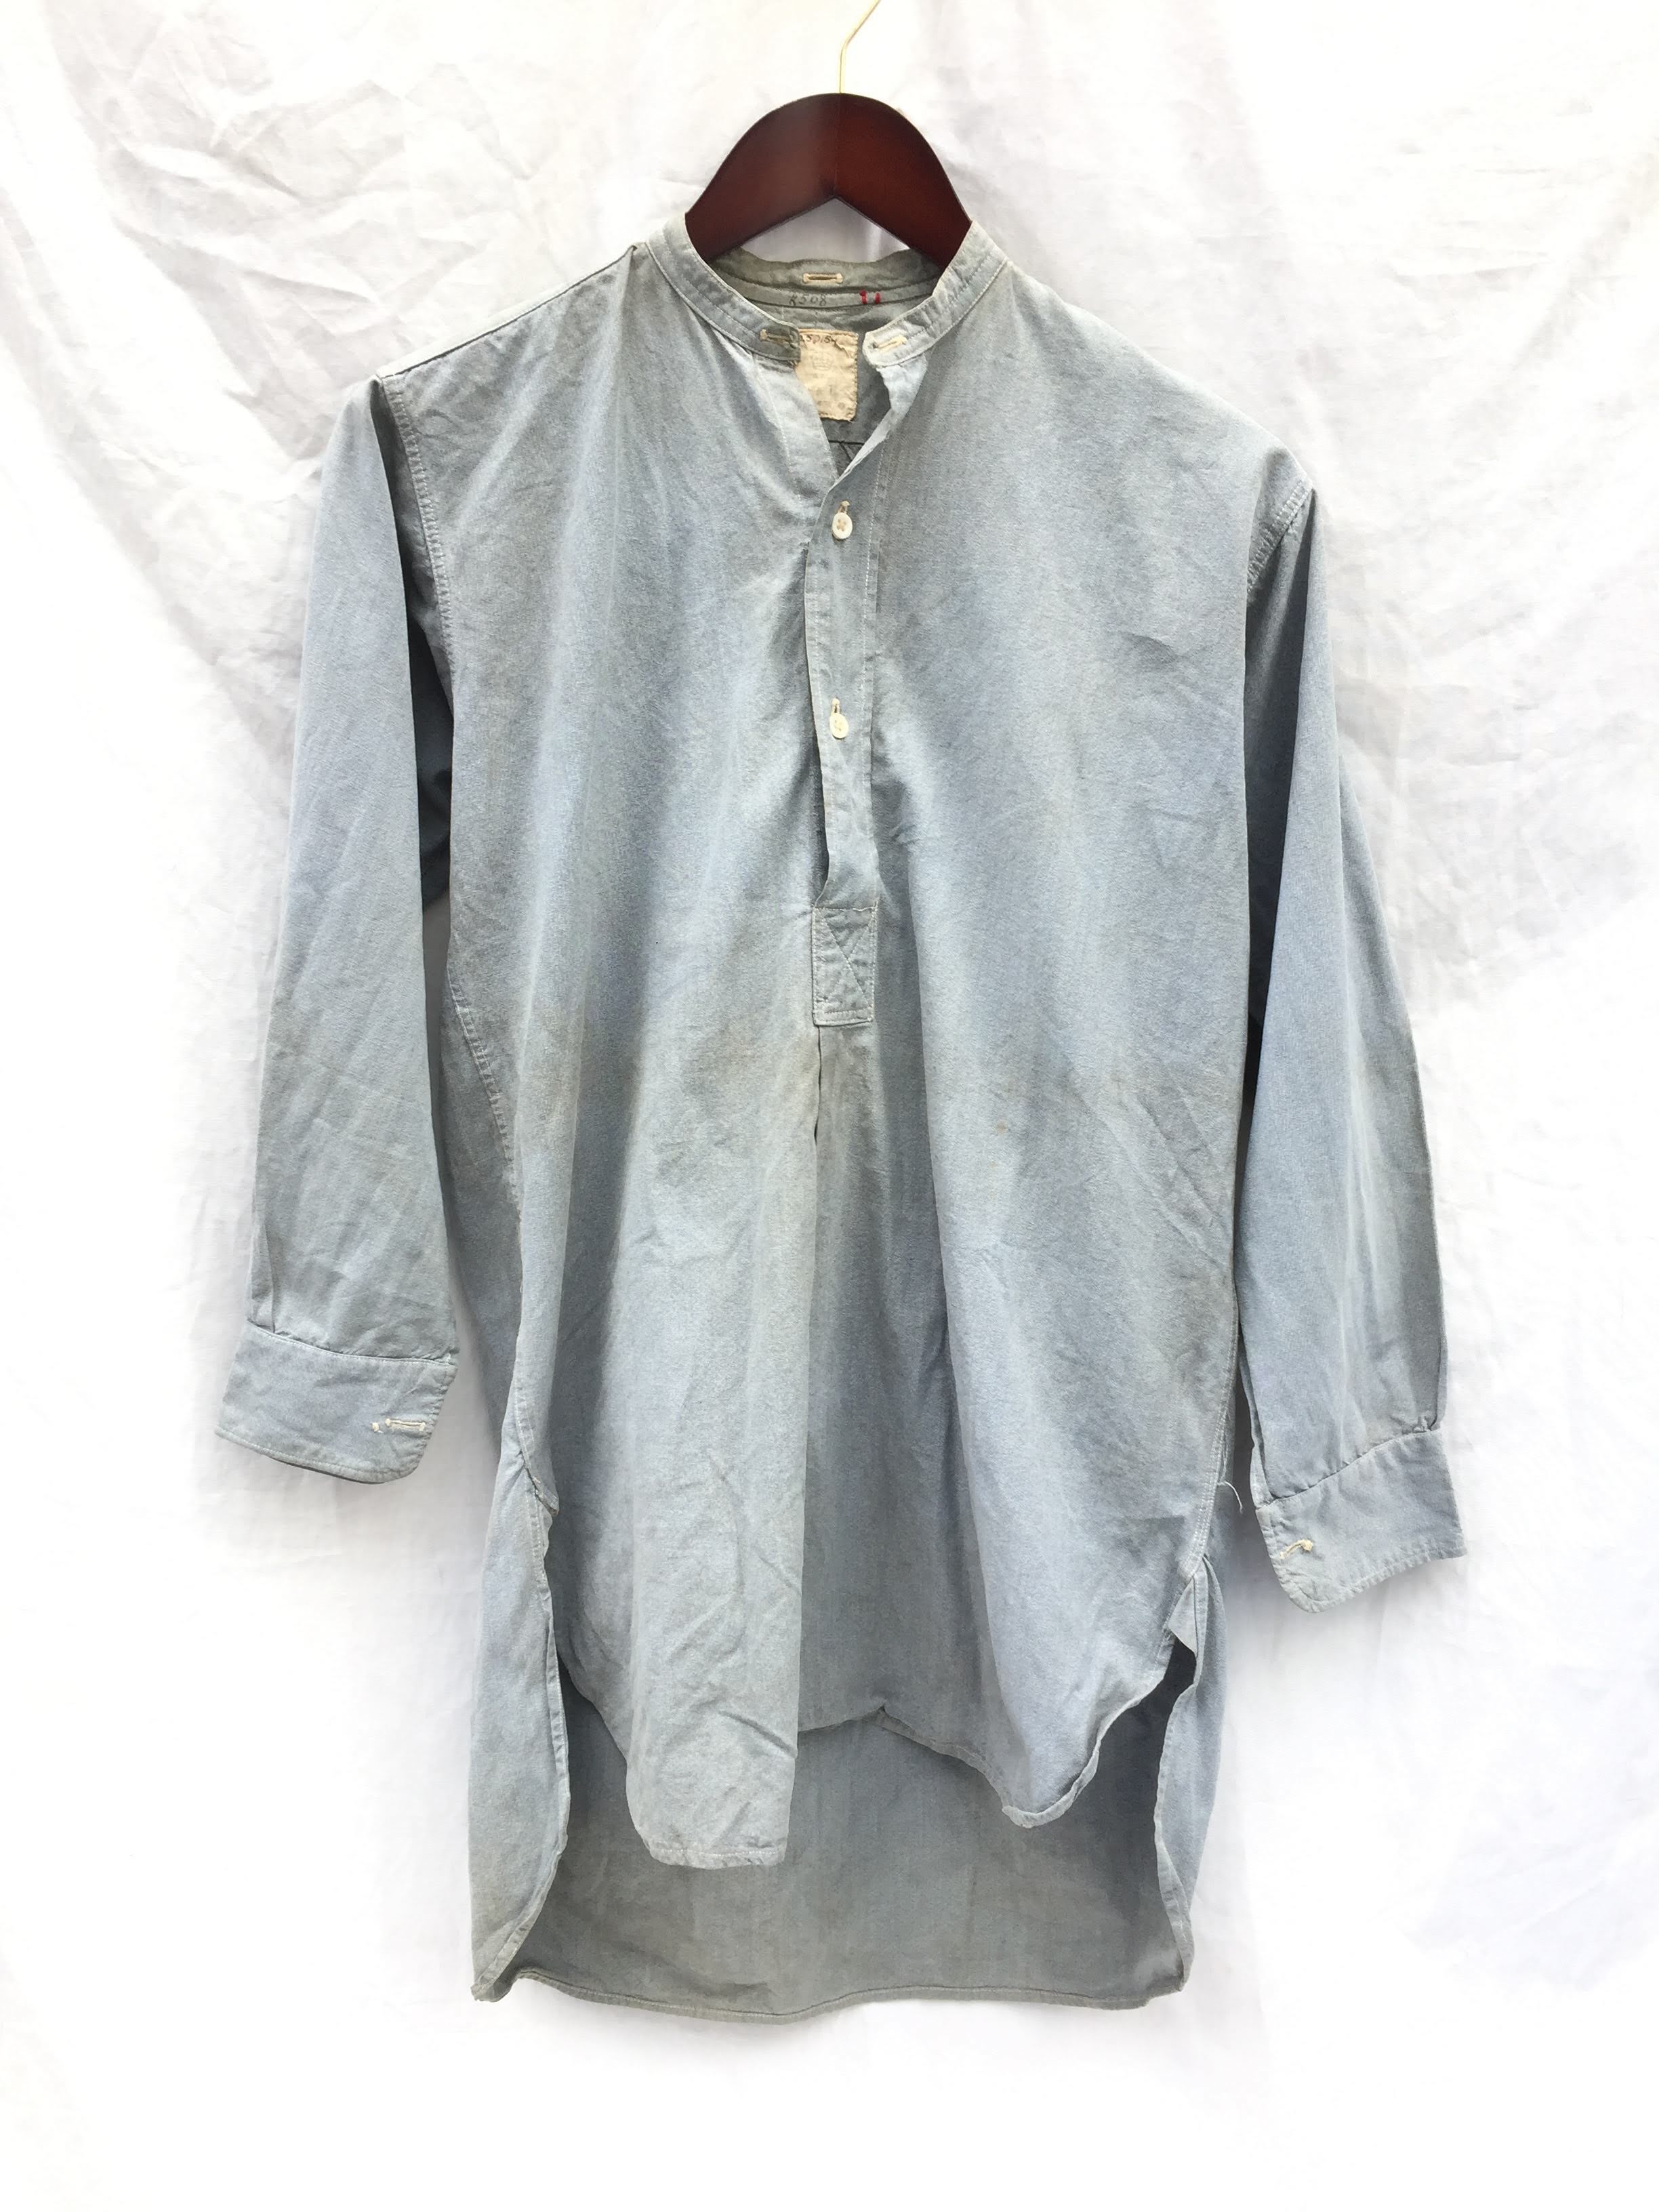 40's RAF (Royal Air Force) Airministry Officer Pullover Shirts